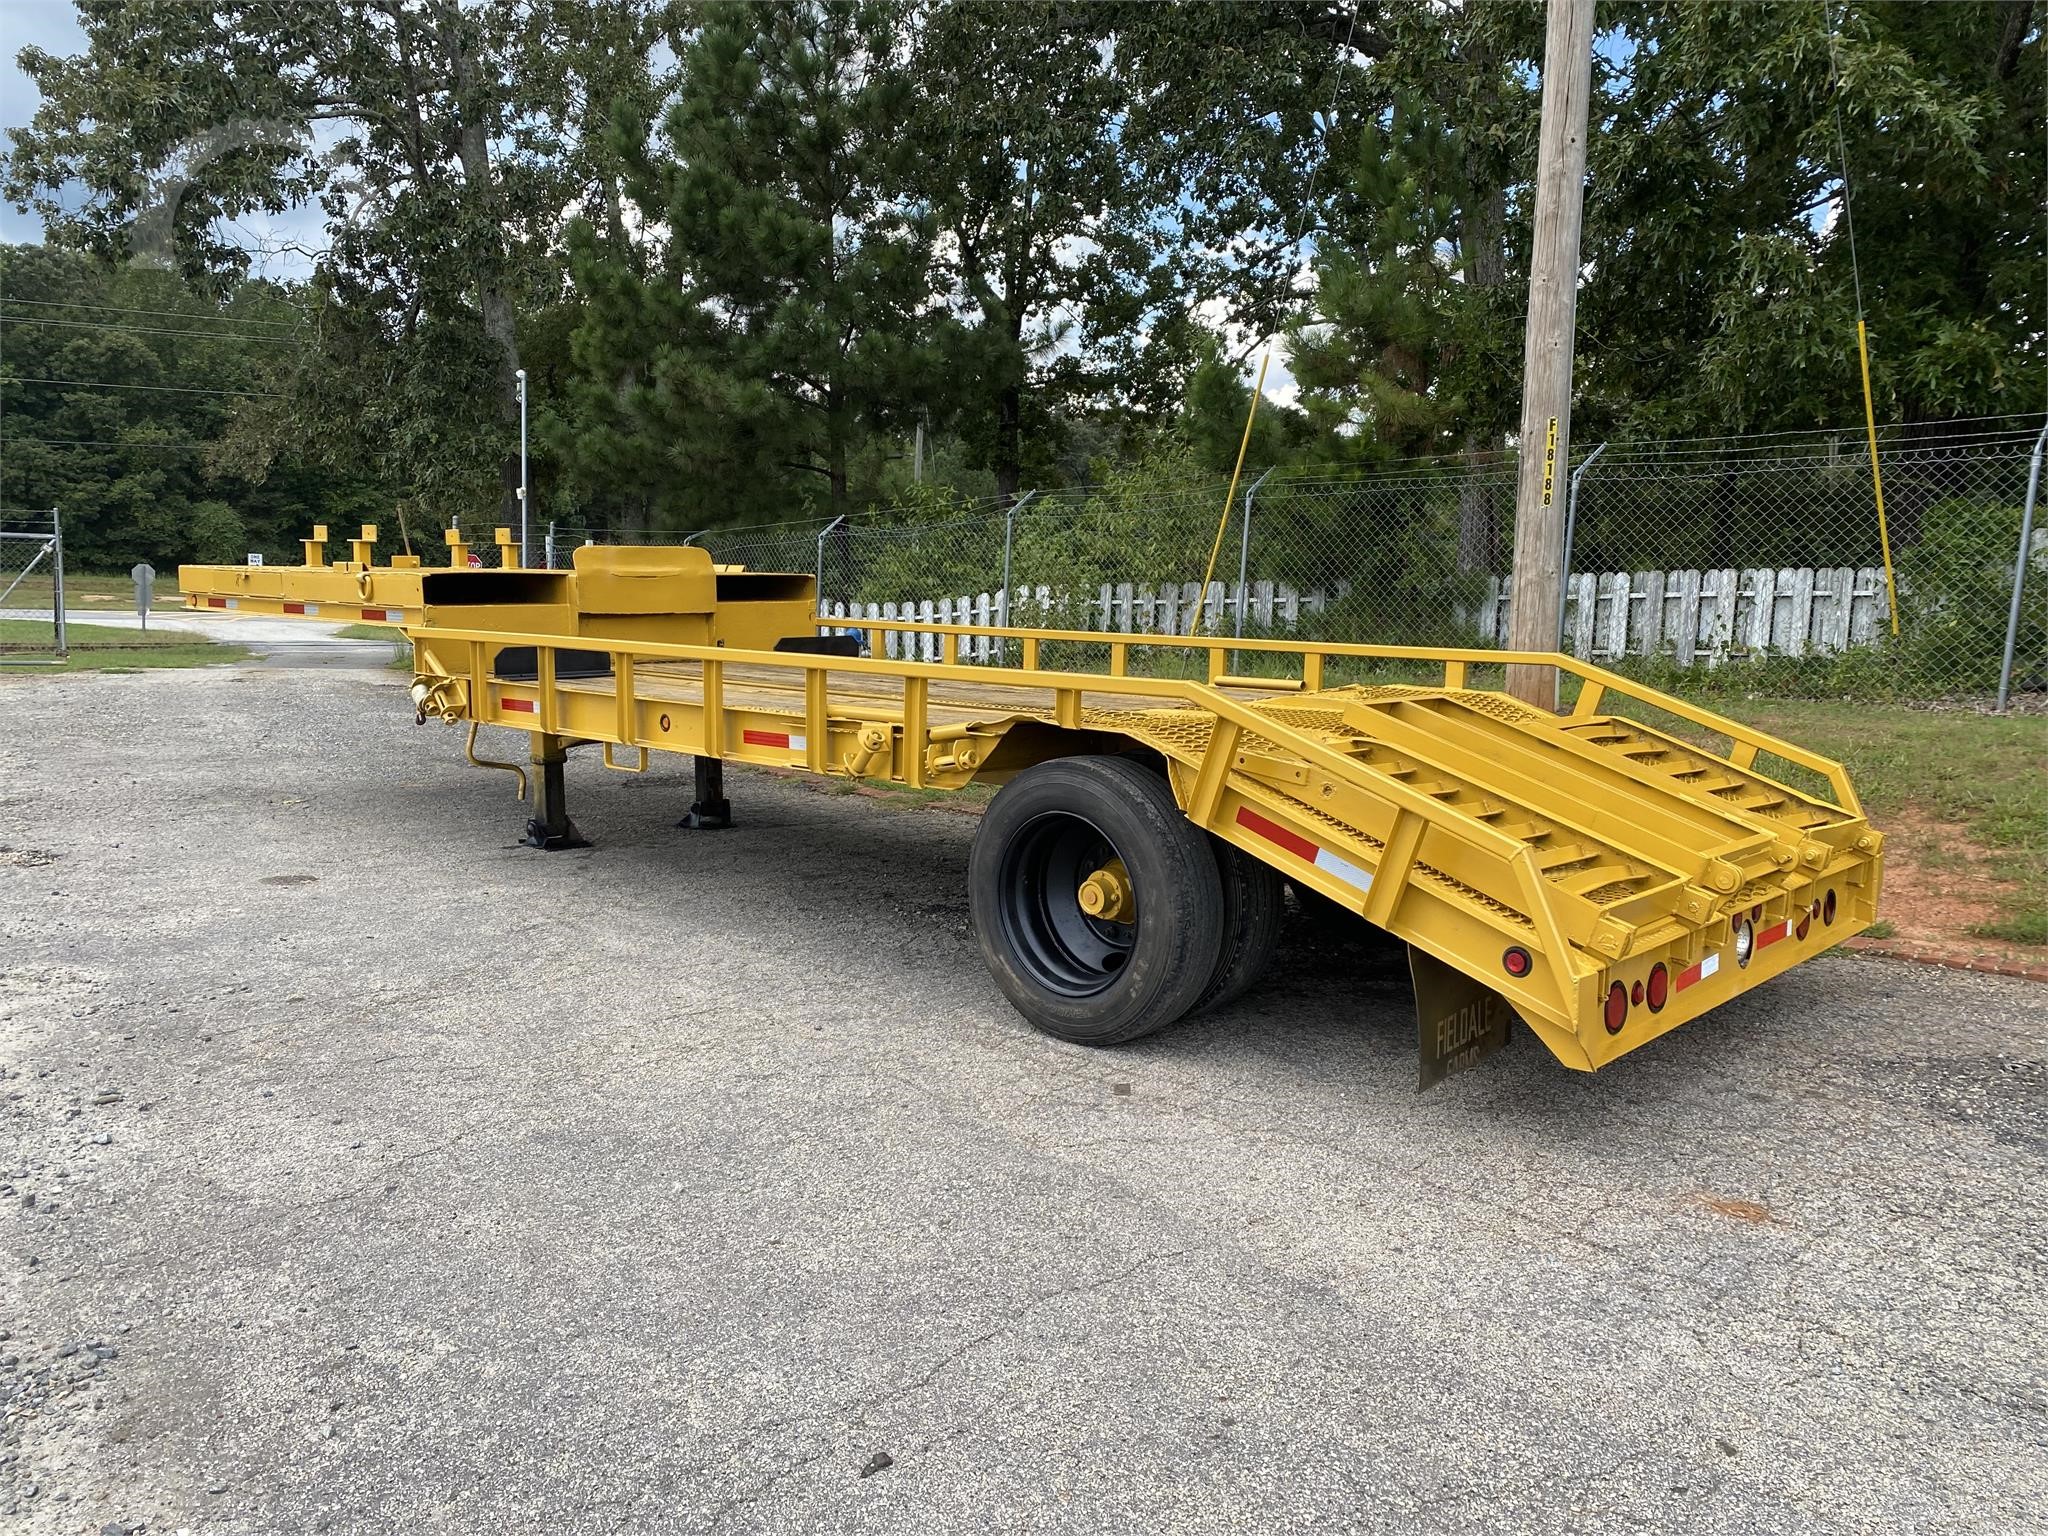 1999 Fontaine 35 Ton RGN Trailer, vin